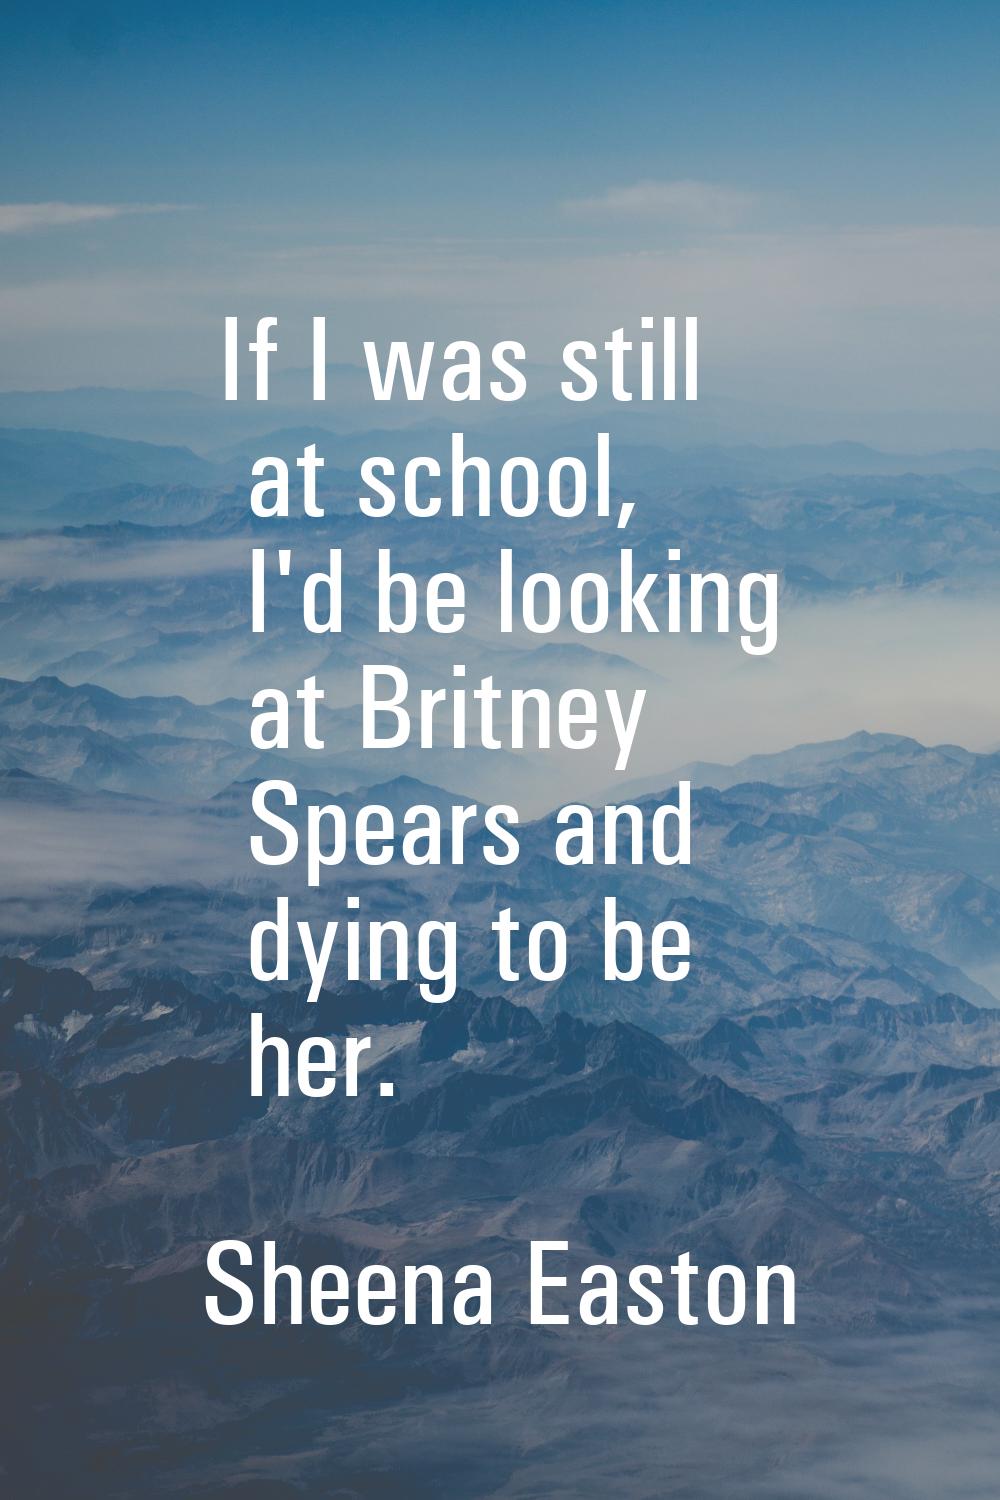 If I was still at school, I'd be looking at Britney Spears and dying to be her.